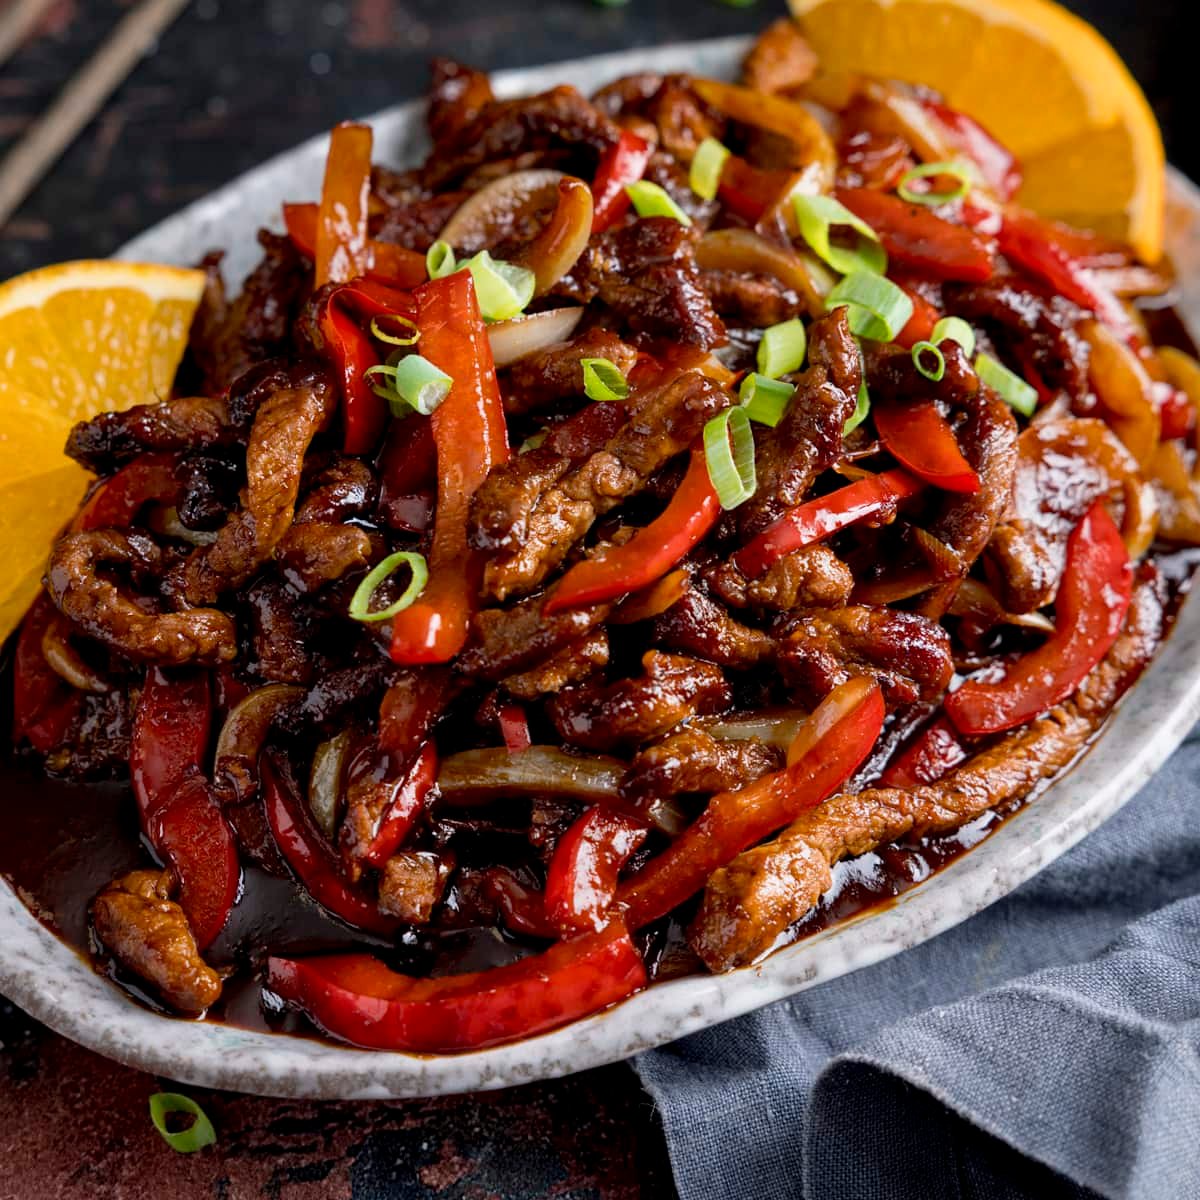 Crispy orange beef with peppers and onions on a shallow oval plate. There are slices of orange on the plate.